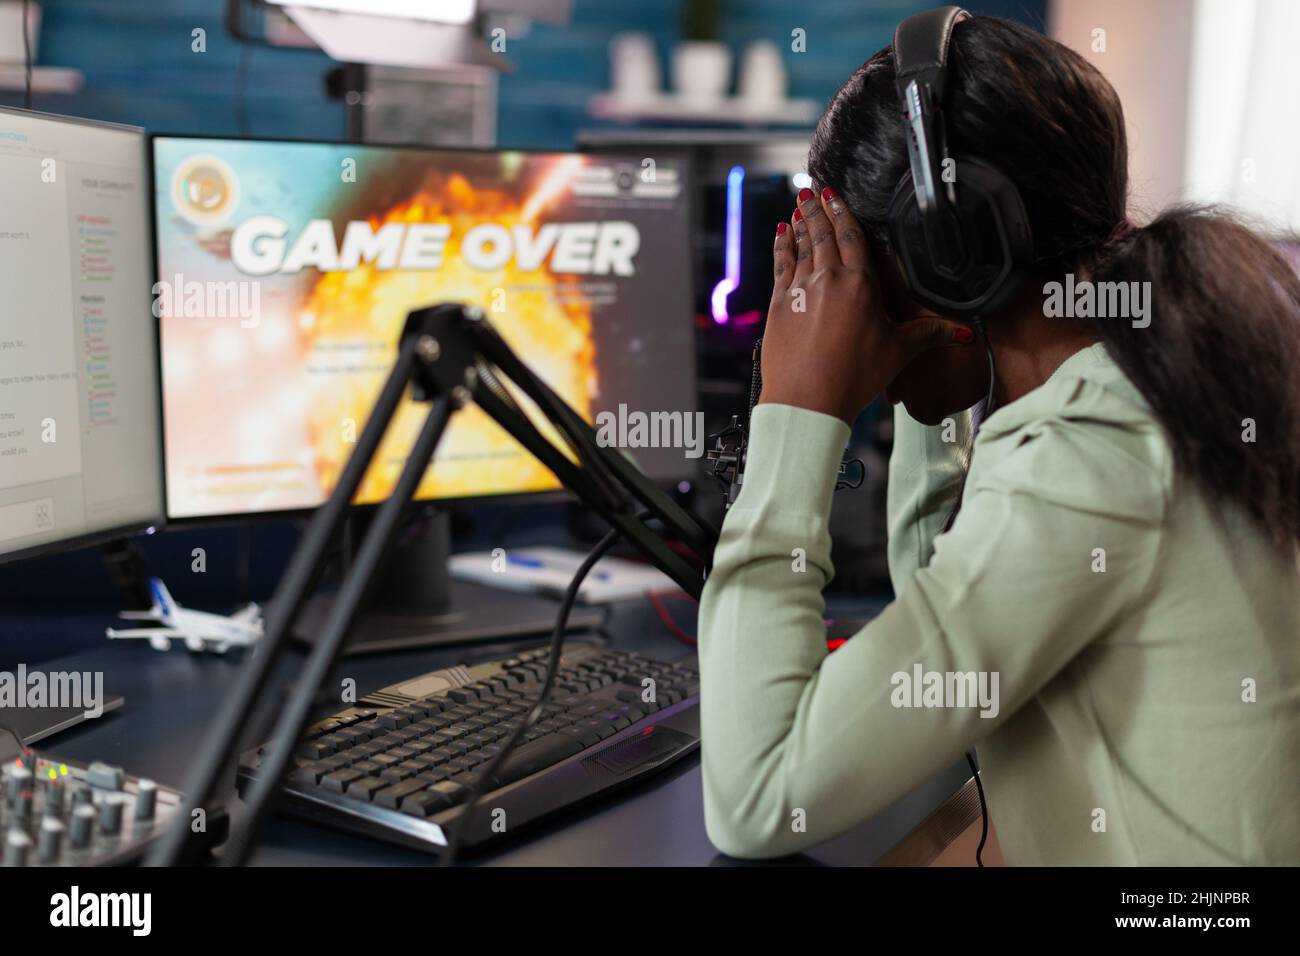 Sad upset pro gamer woman playing space shooter video games losing online championship while talking with players on streaming chat. Nervous streamer using RGB gaming computer. Game over on screen Stock Photo